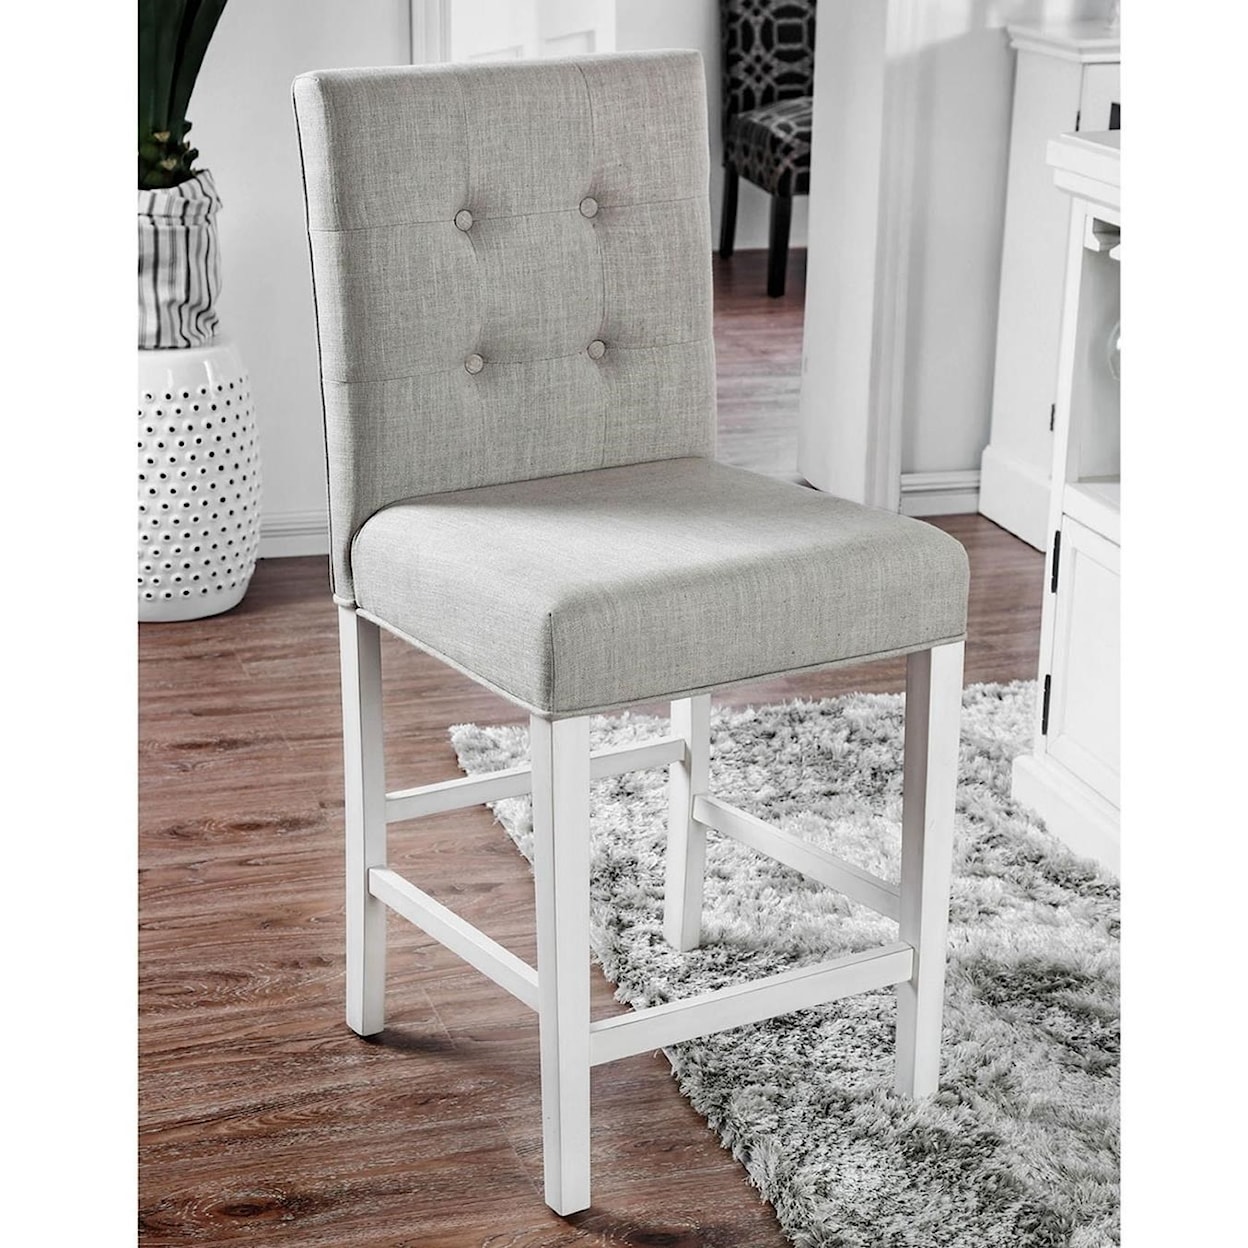 Furniture of America Sutton Set of 2 Counter Height Chairs